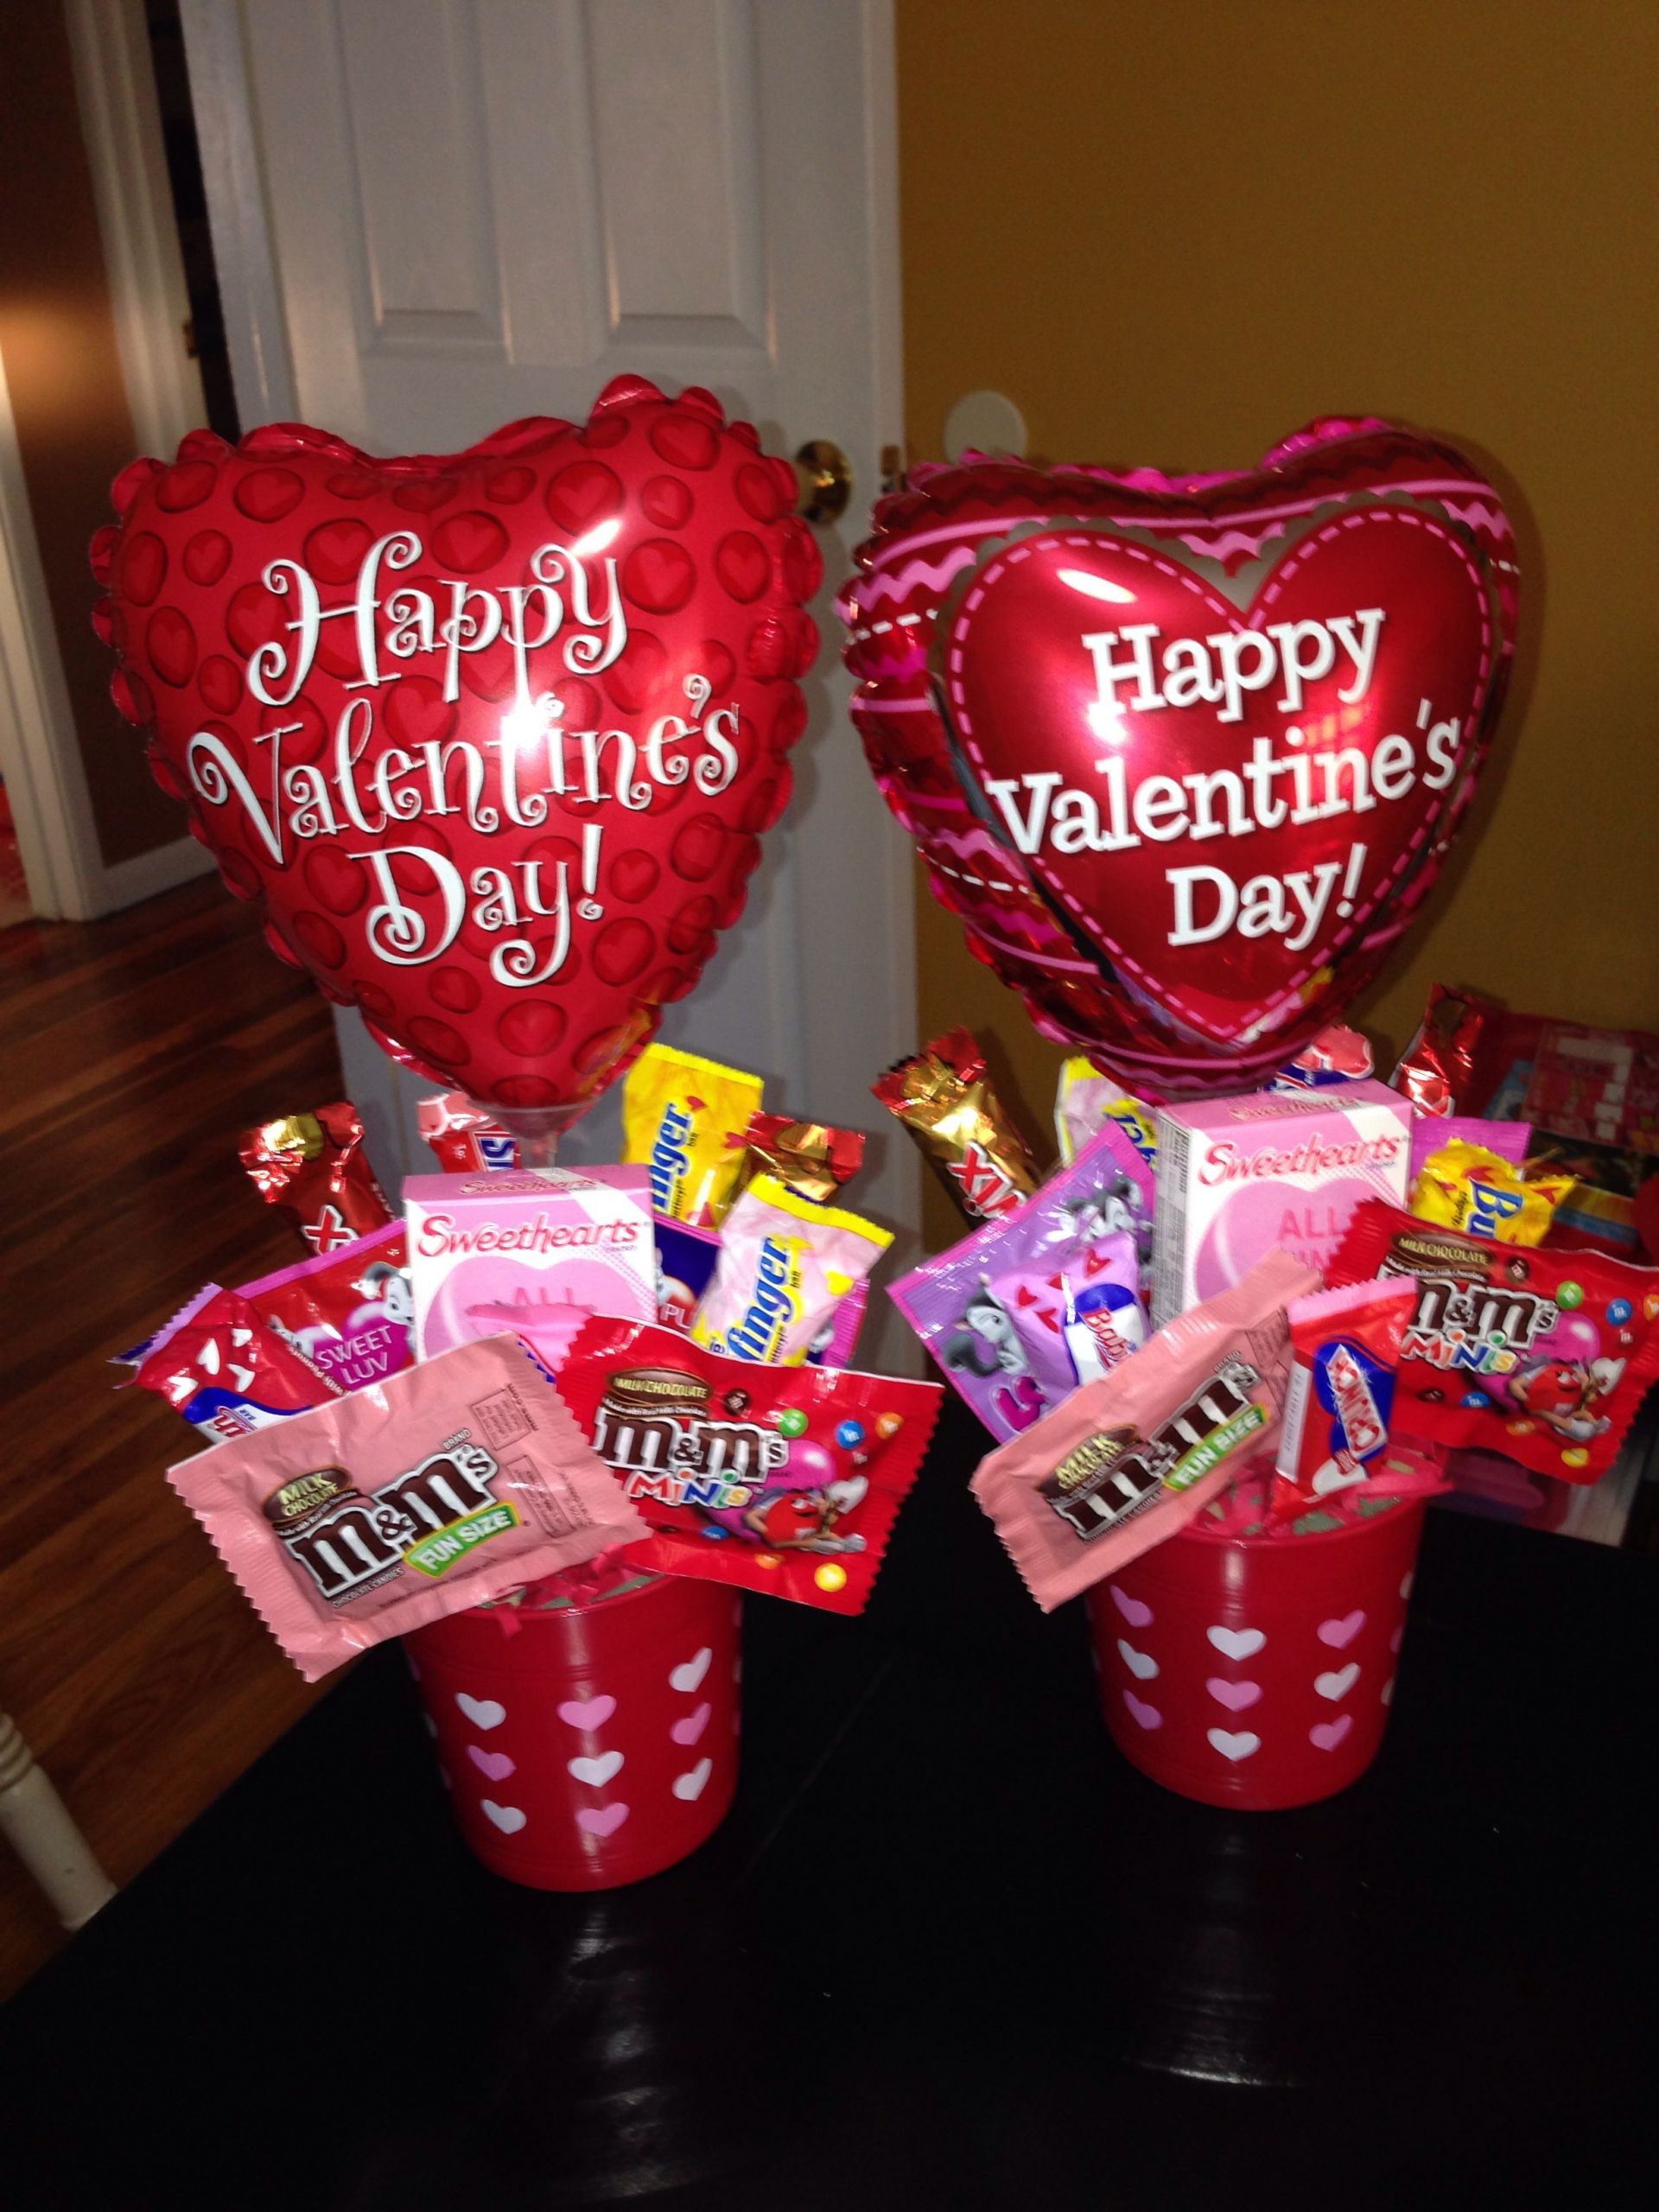 Valentine Gift Ideas Cheap
 Small valentines bouquets